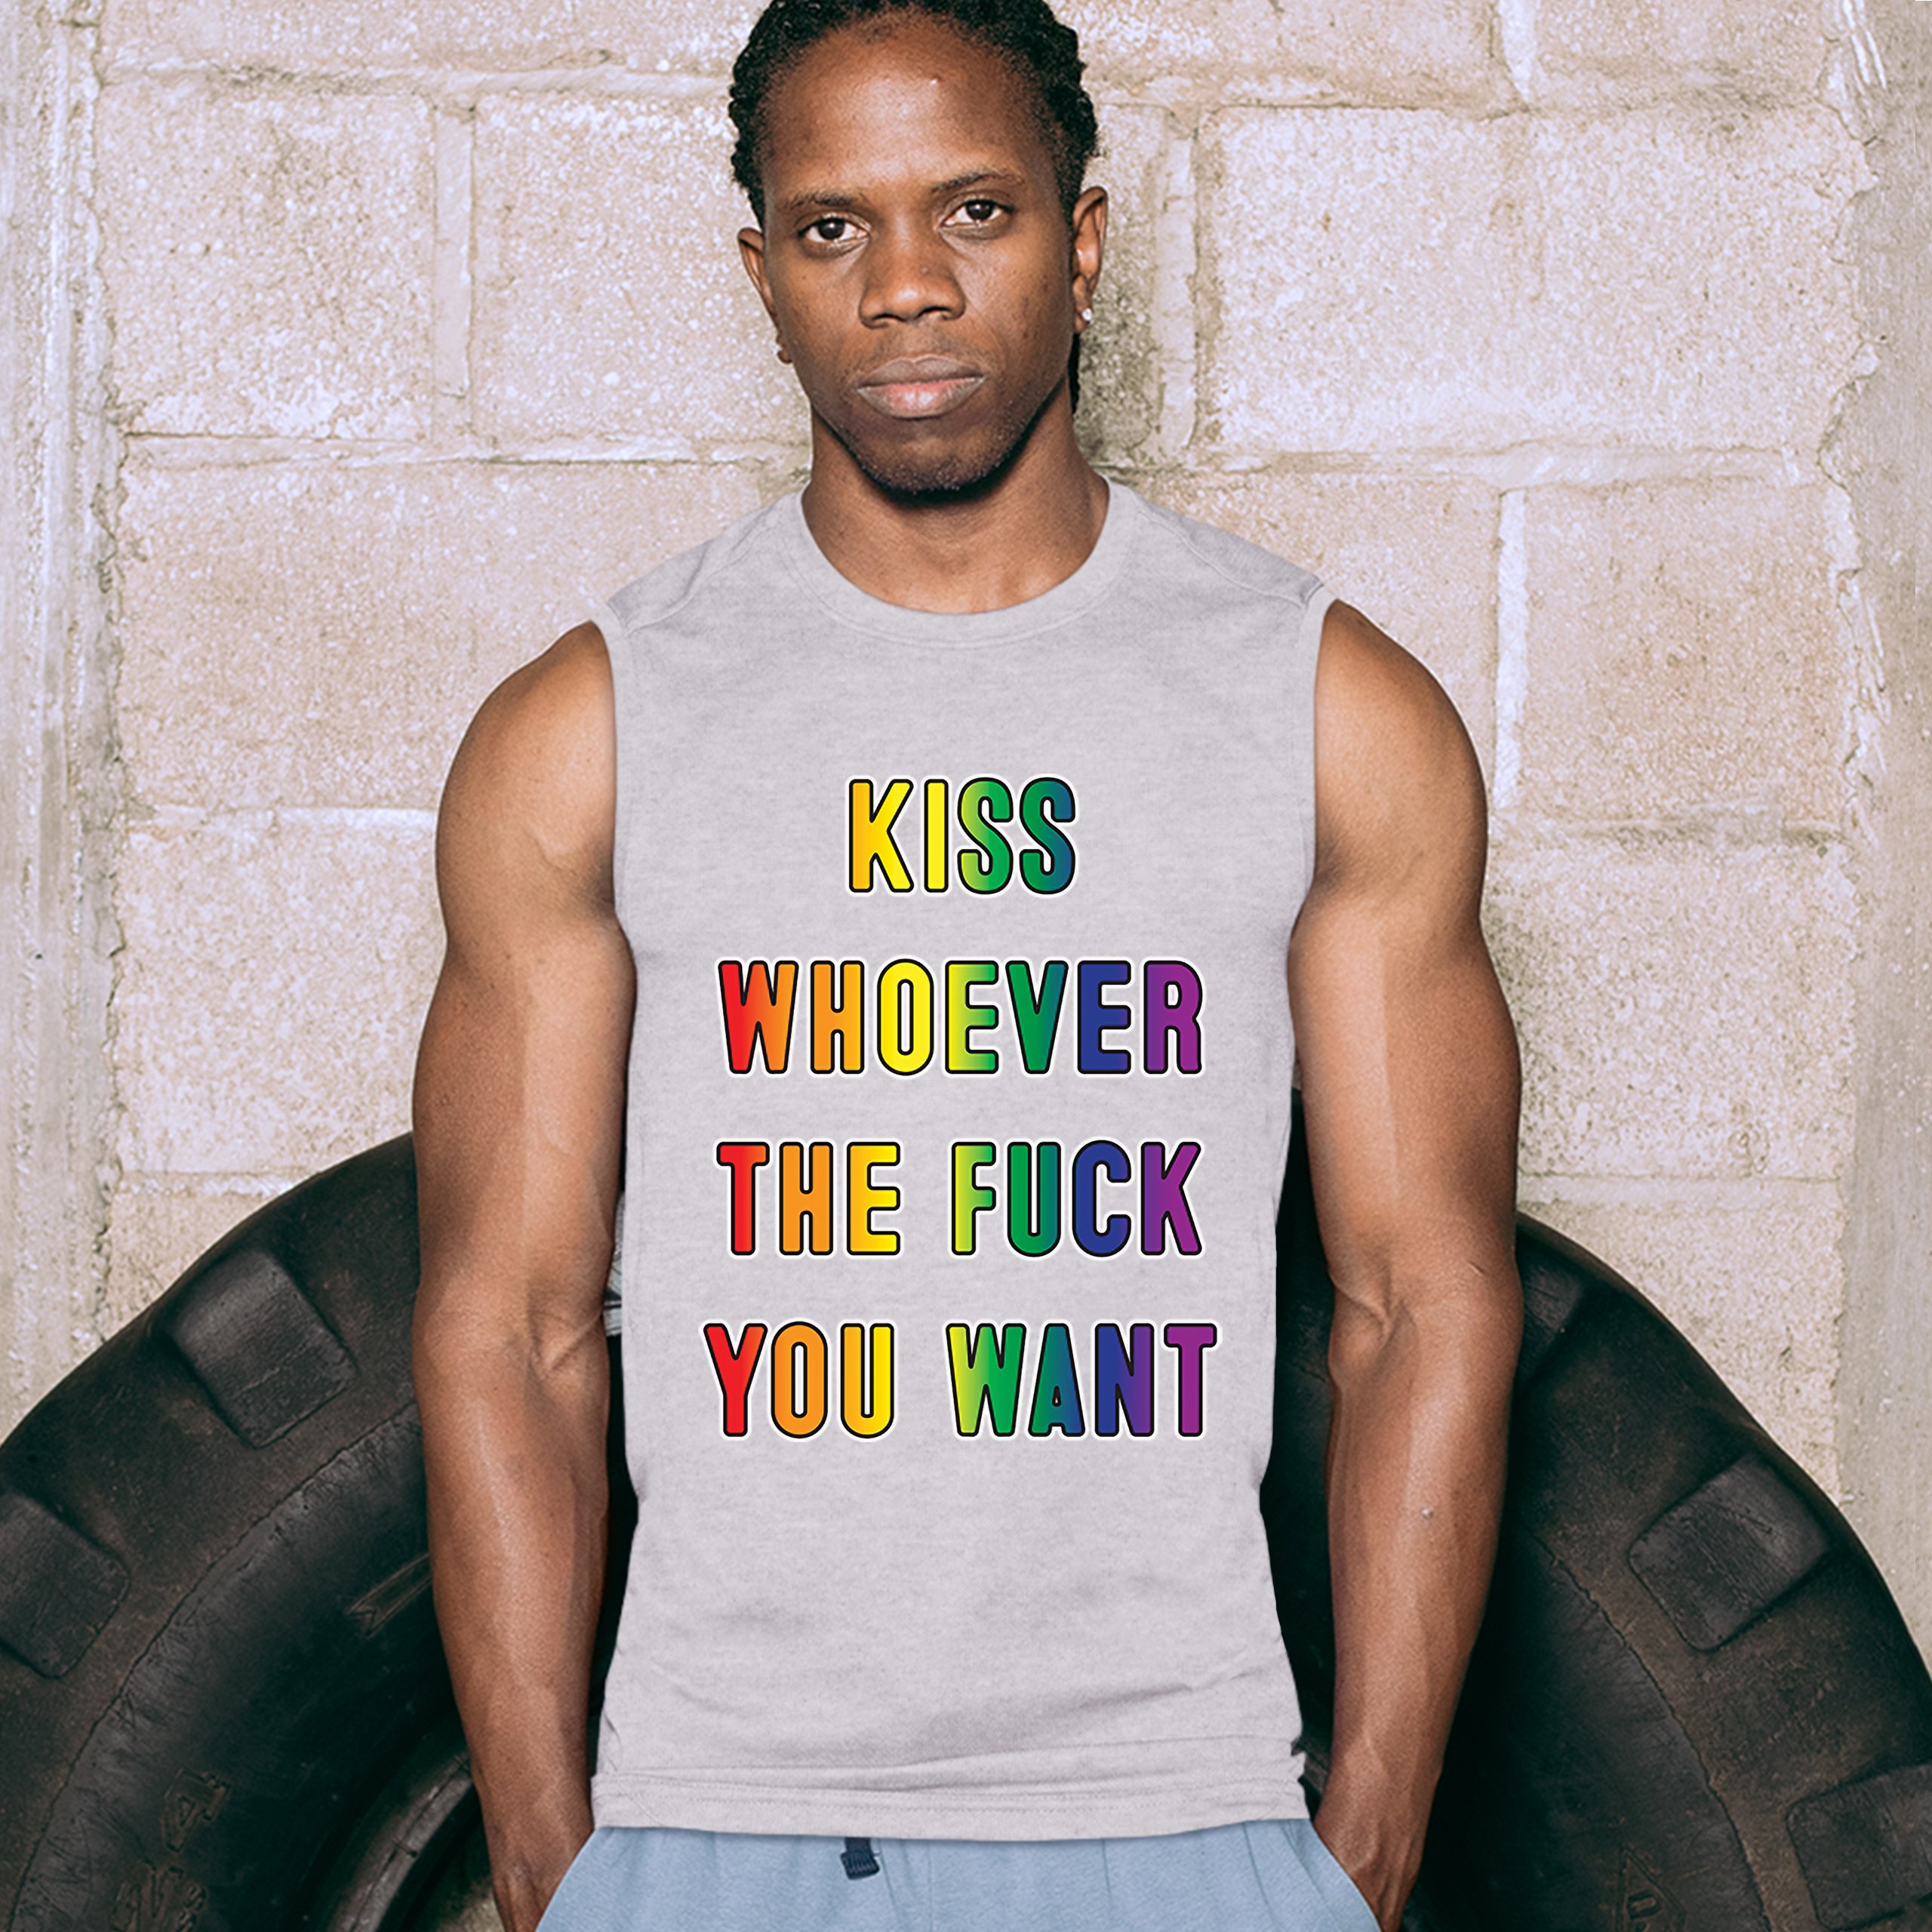 Kiss Whoever The Fk You Want Muscle Shirt Lgbt Gay Pride Equality Mens Ebay 6038